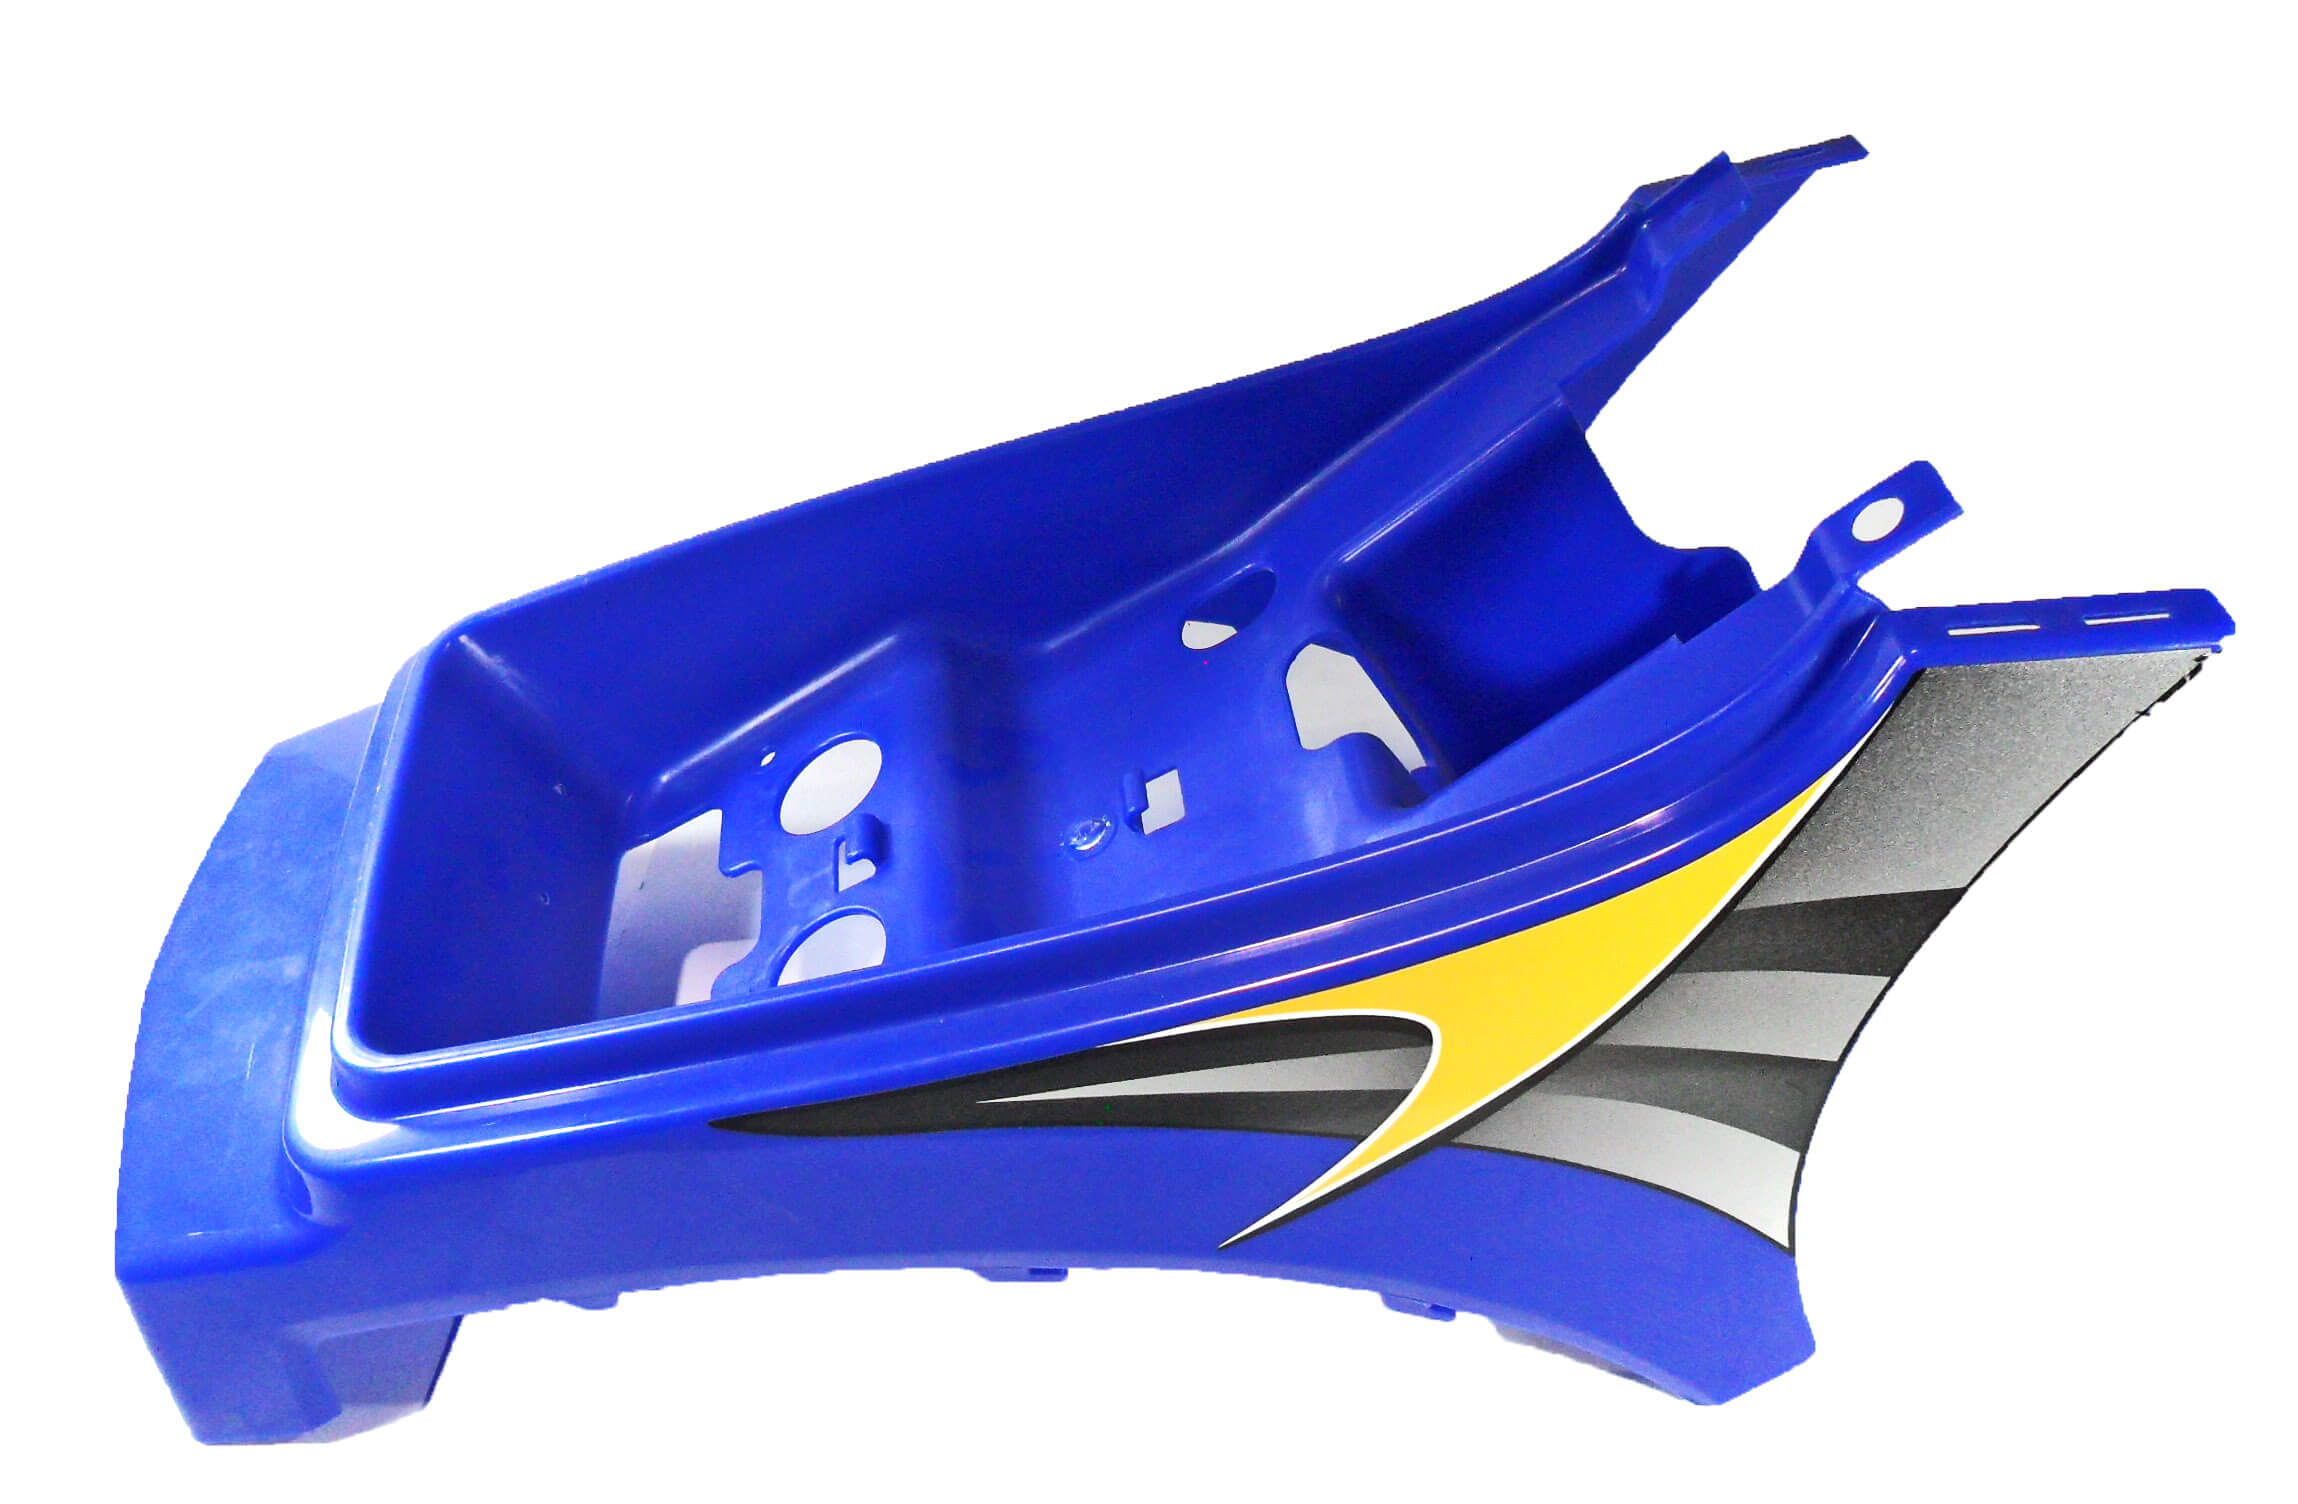 Rear Body Cover (Blue) Fits E-Ton Viper RXL 50, 70, 90cc ATVs Note: Front Body Cover (Blue) Fits E-Ton Viper RXL 50, 70, 90cc ATVs Note: This is a new body cover with minor blemishes due to packaging.